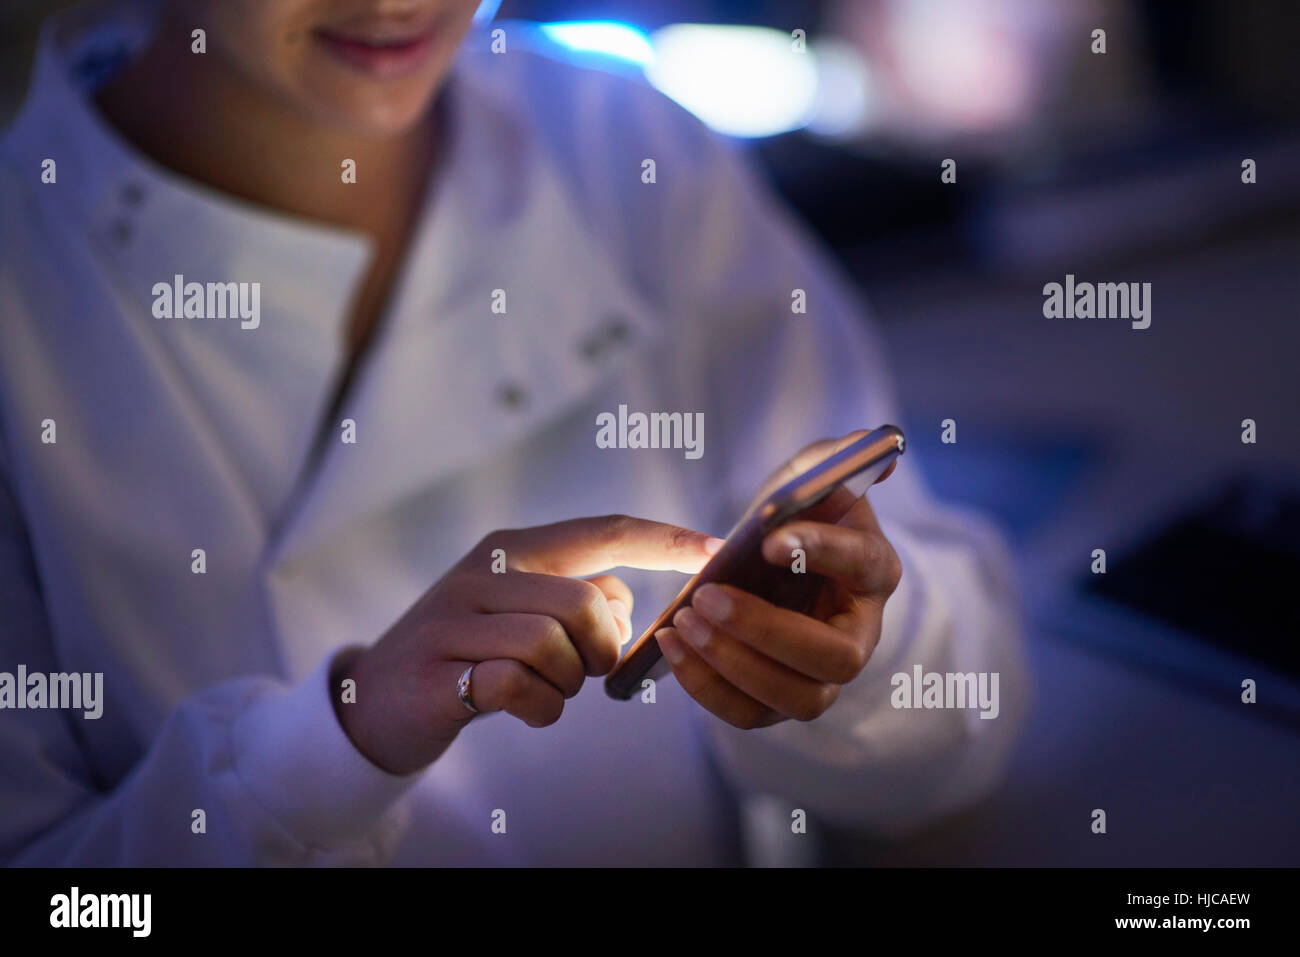 Scientist in laboratory texting on smartphone Banque D'Images